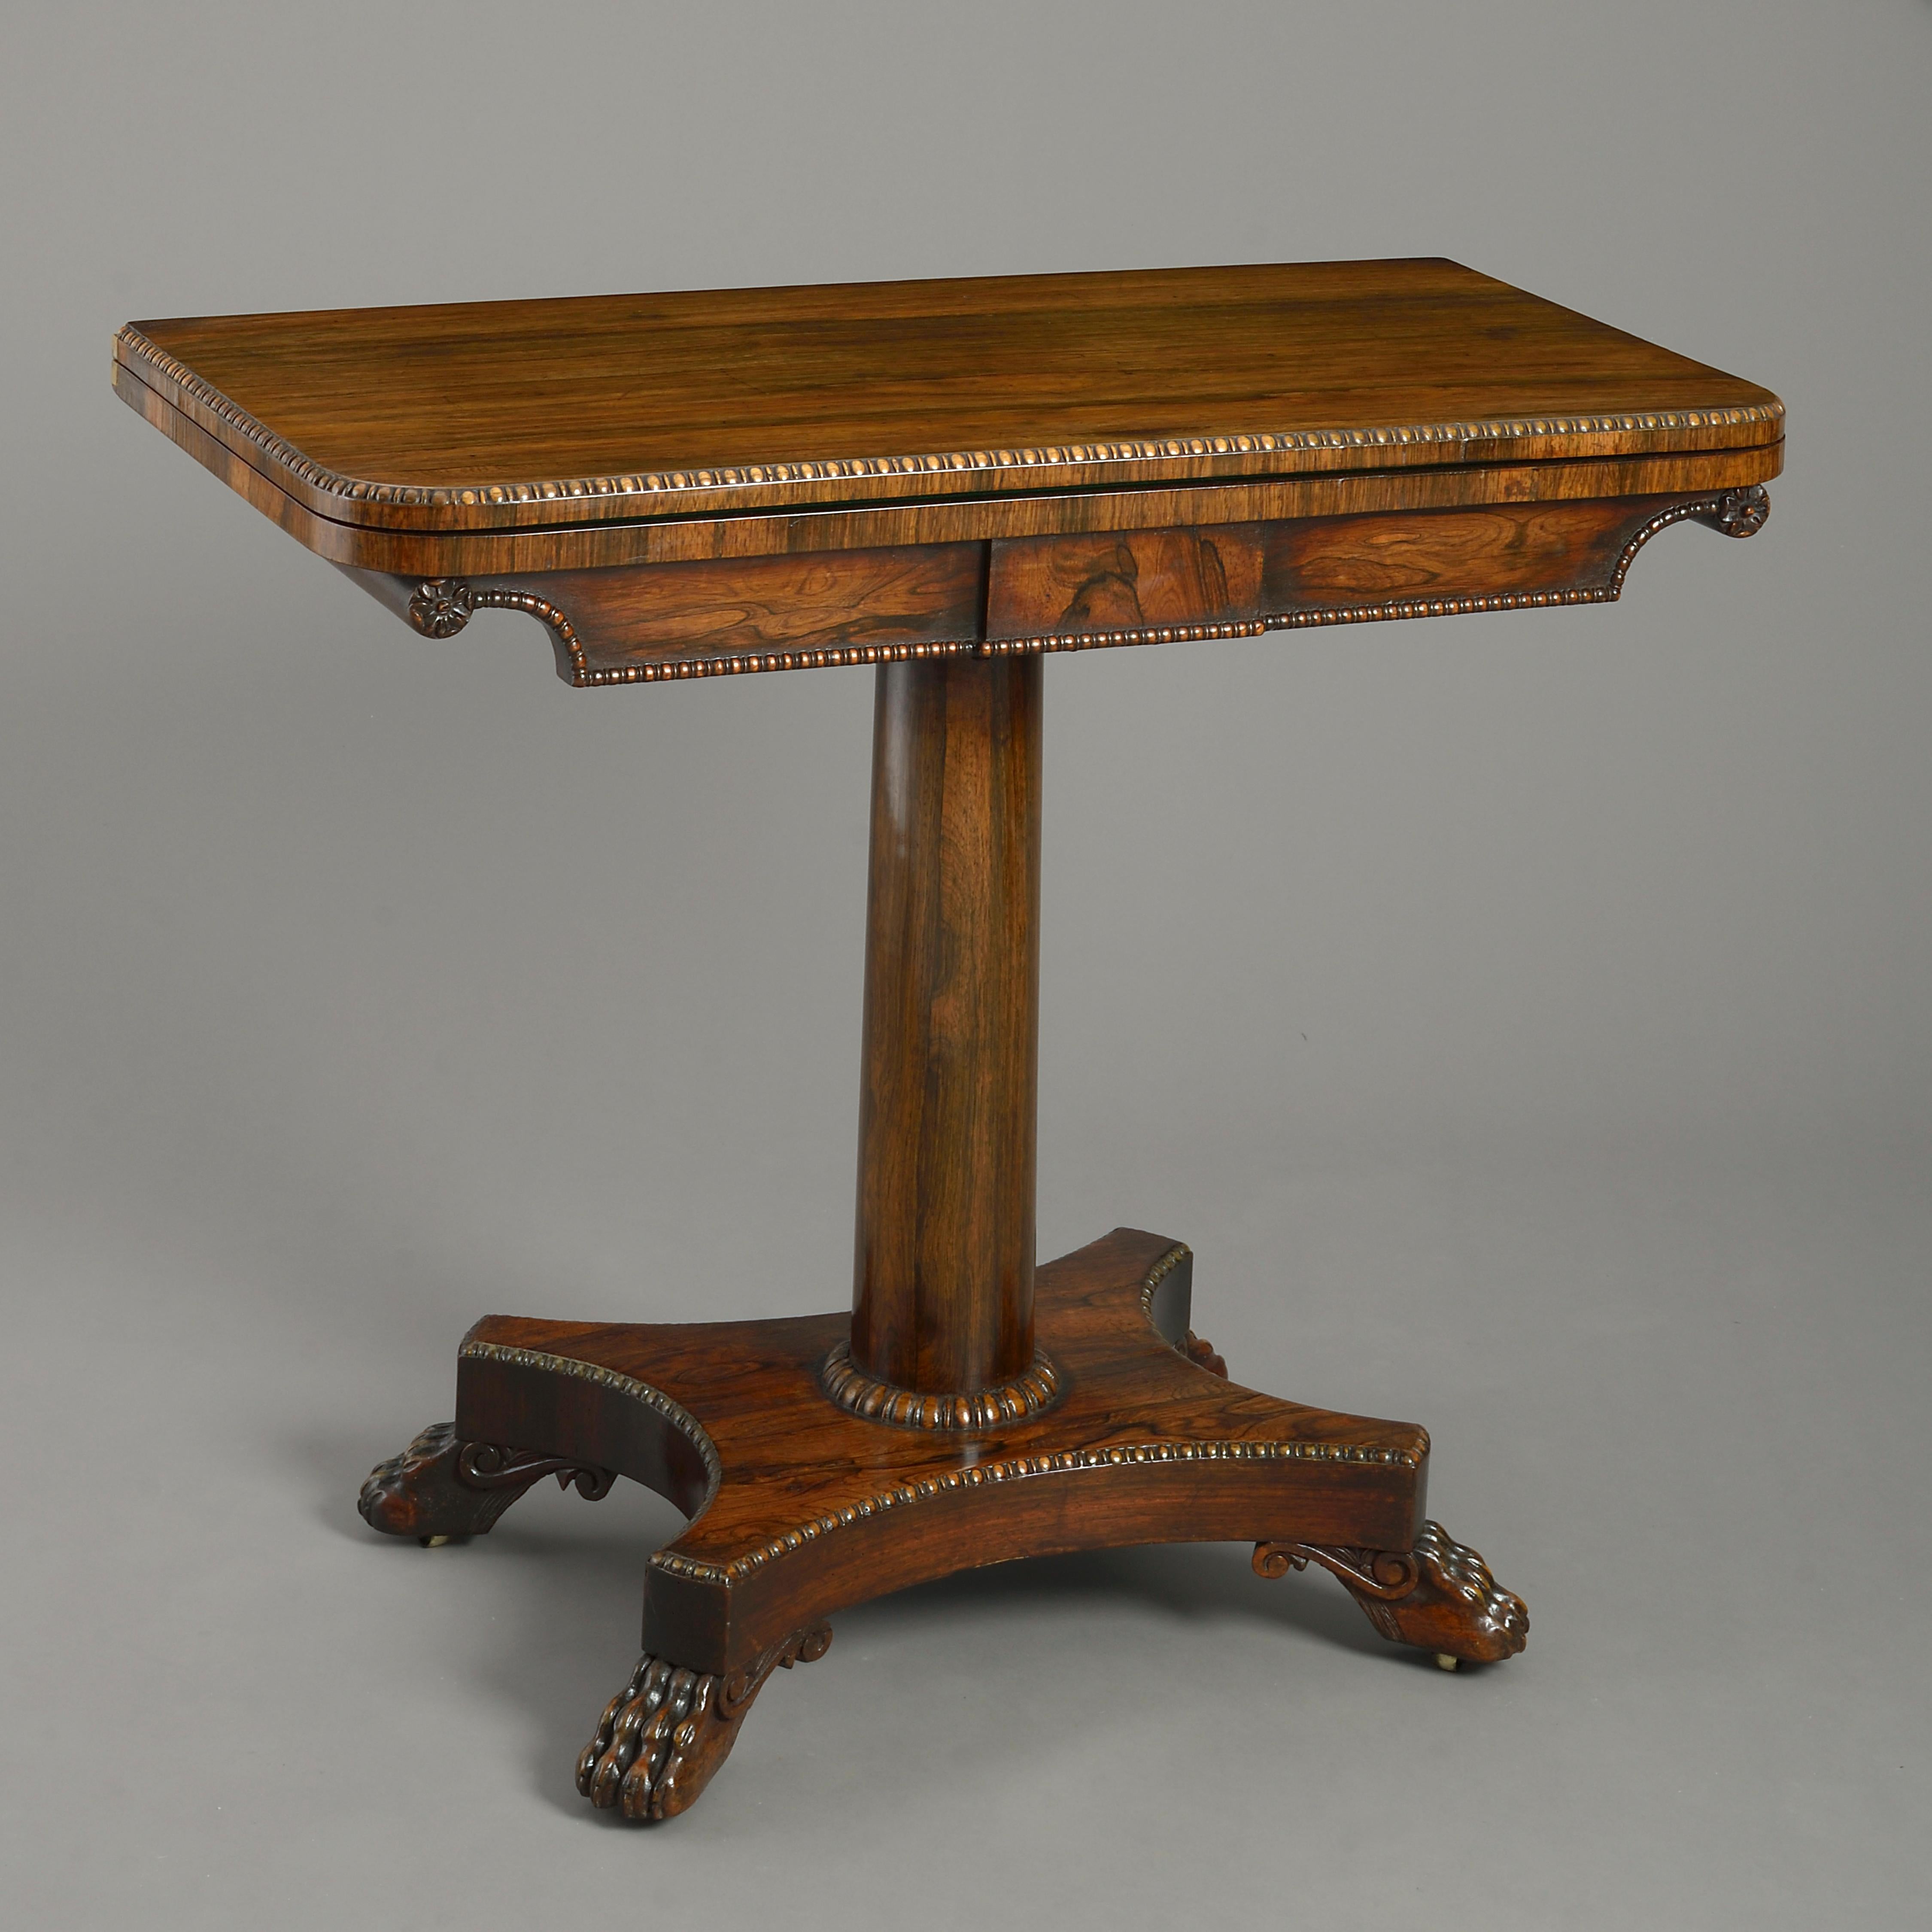 English Pair of Early 19th Century Regency Period Rosewood Card Tables